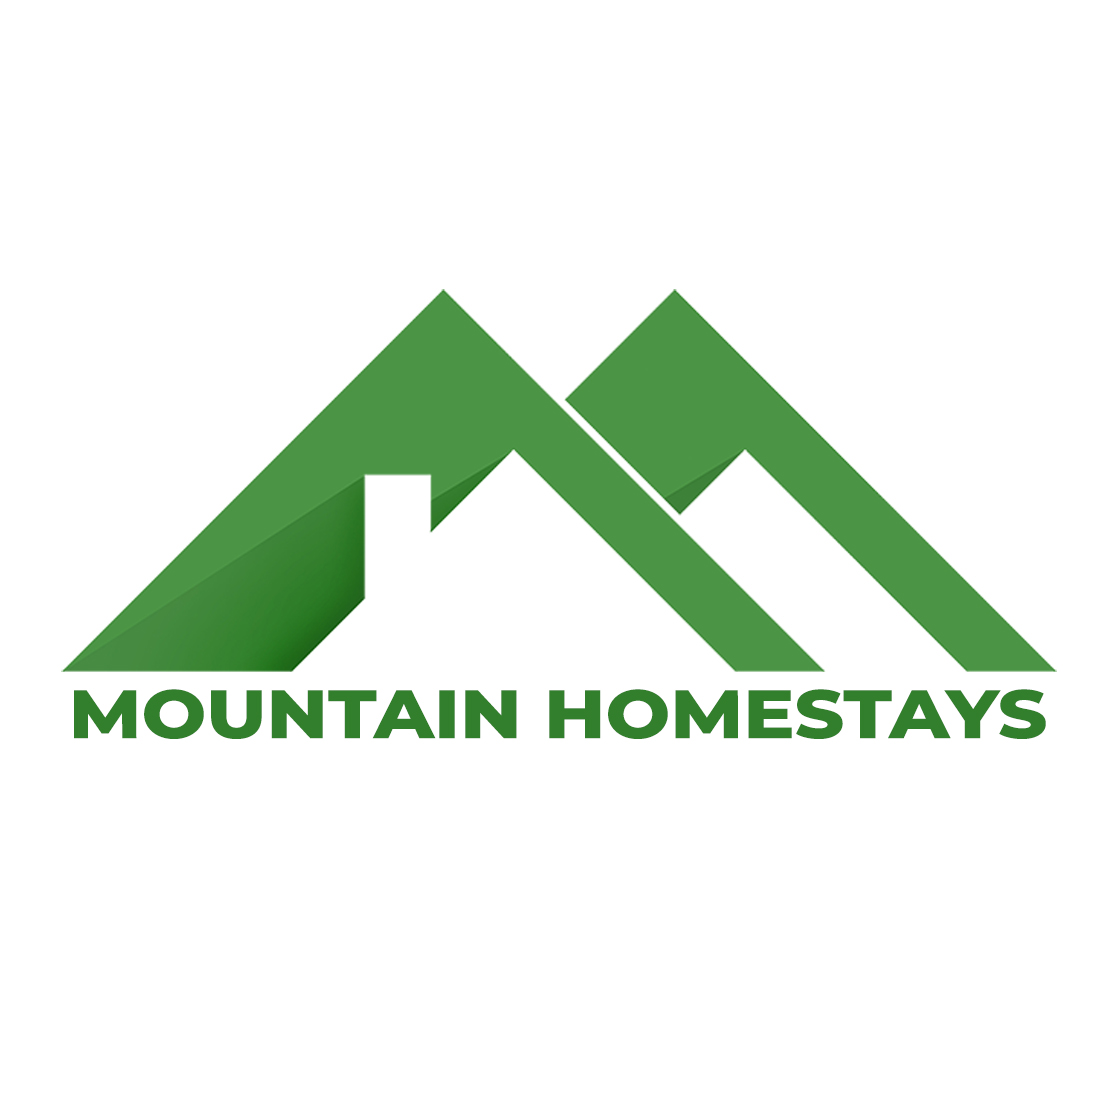 Homestay Beach Logo Stock Photos and Images - 123RF